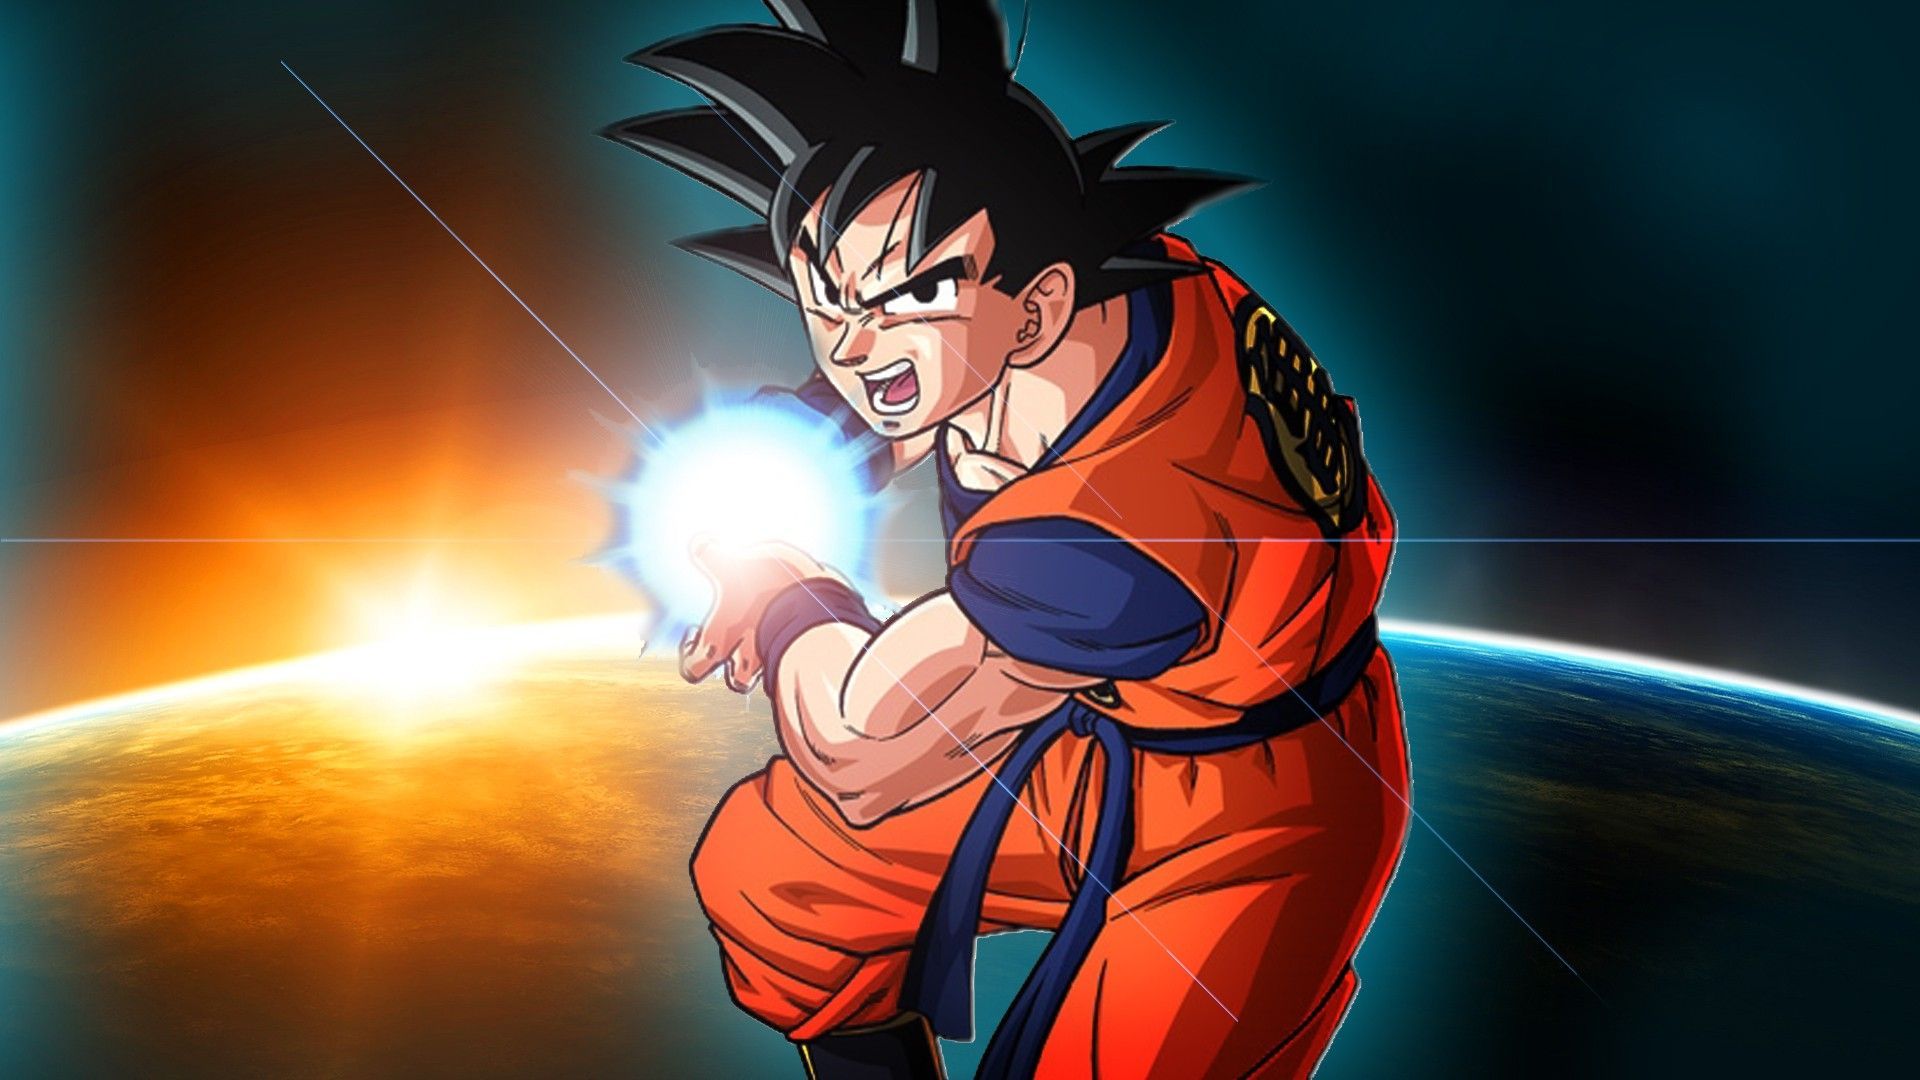 Dragon Ball Z Wallpapers Goku Wallpapers, Backgrounds, Images